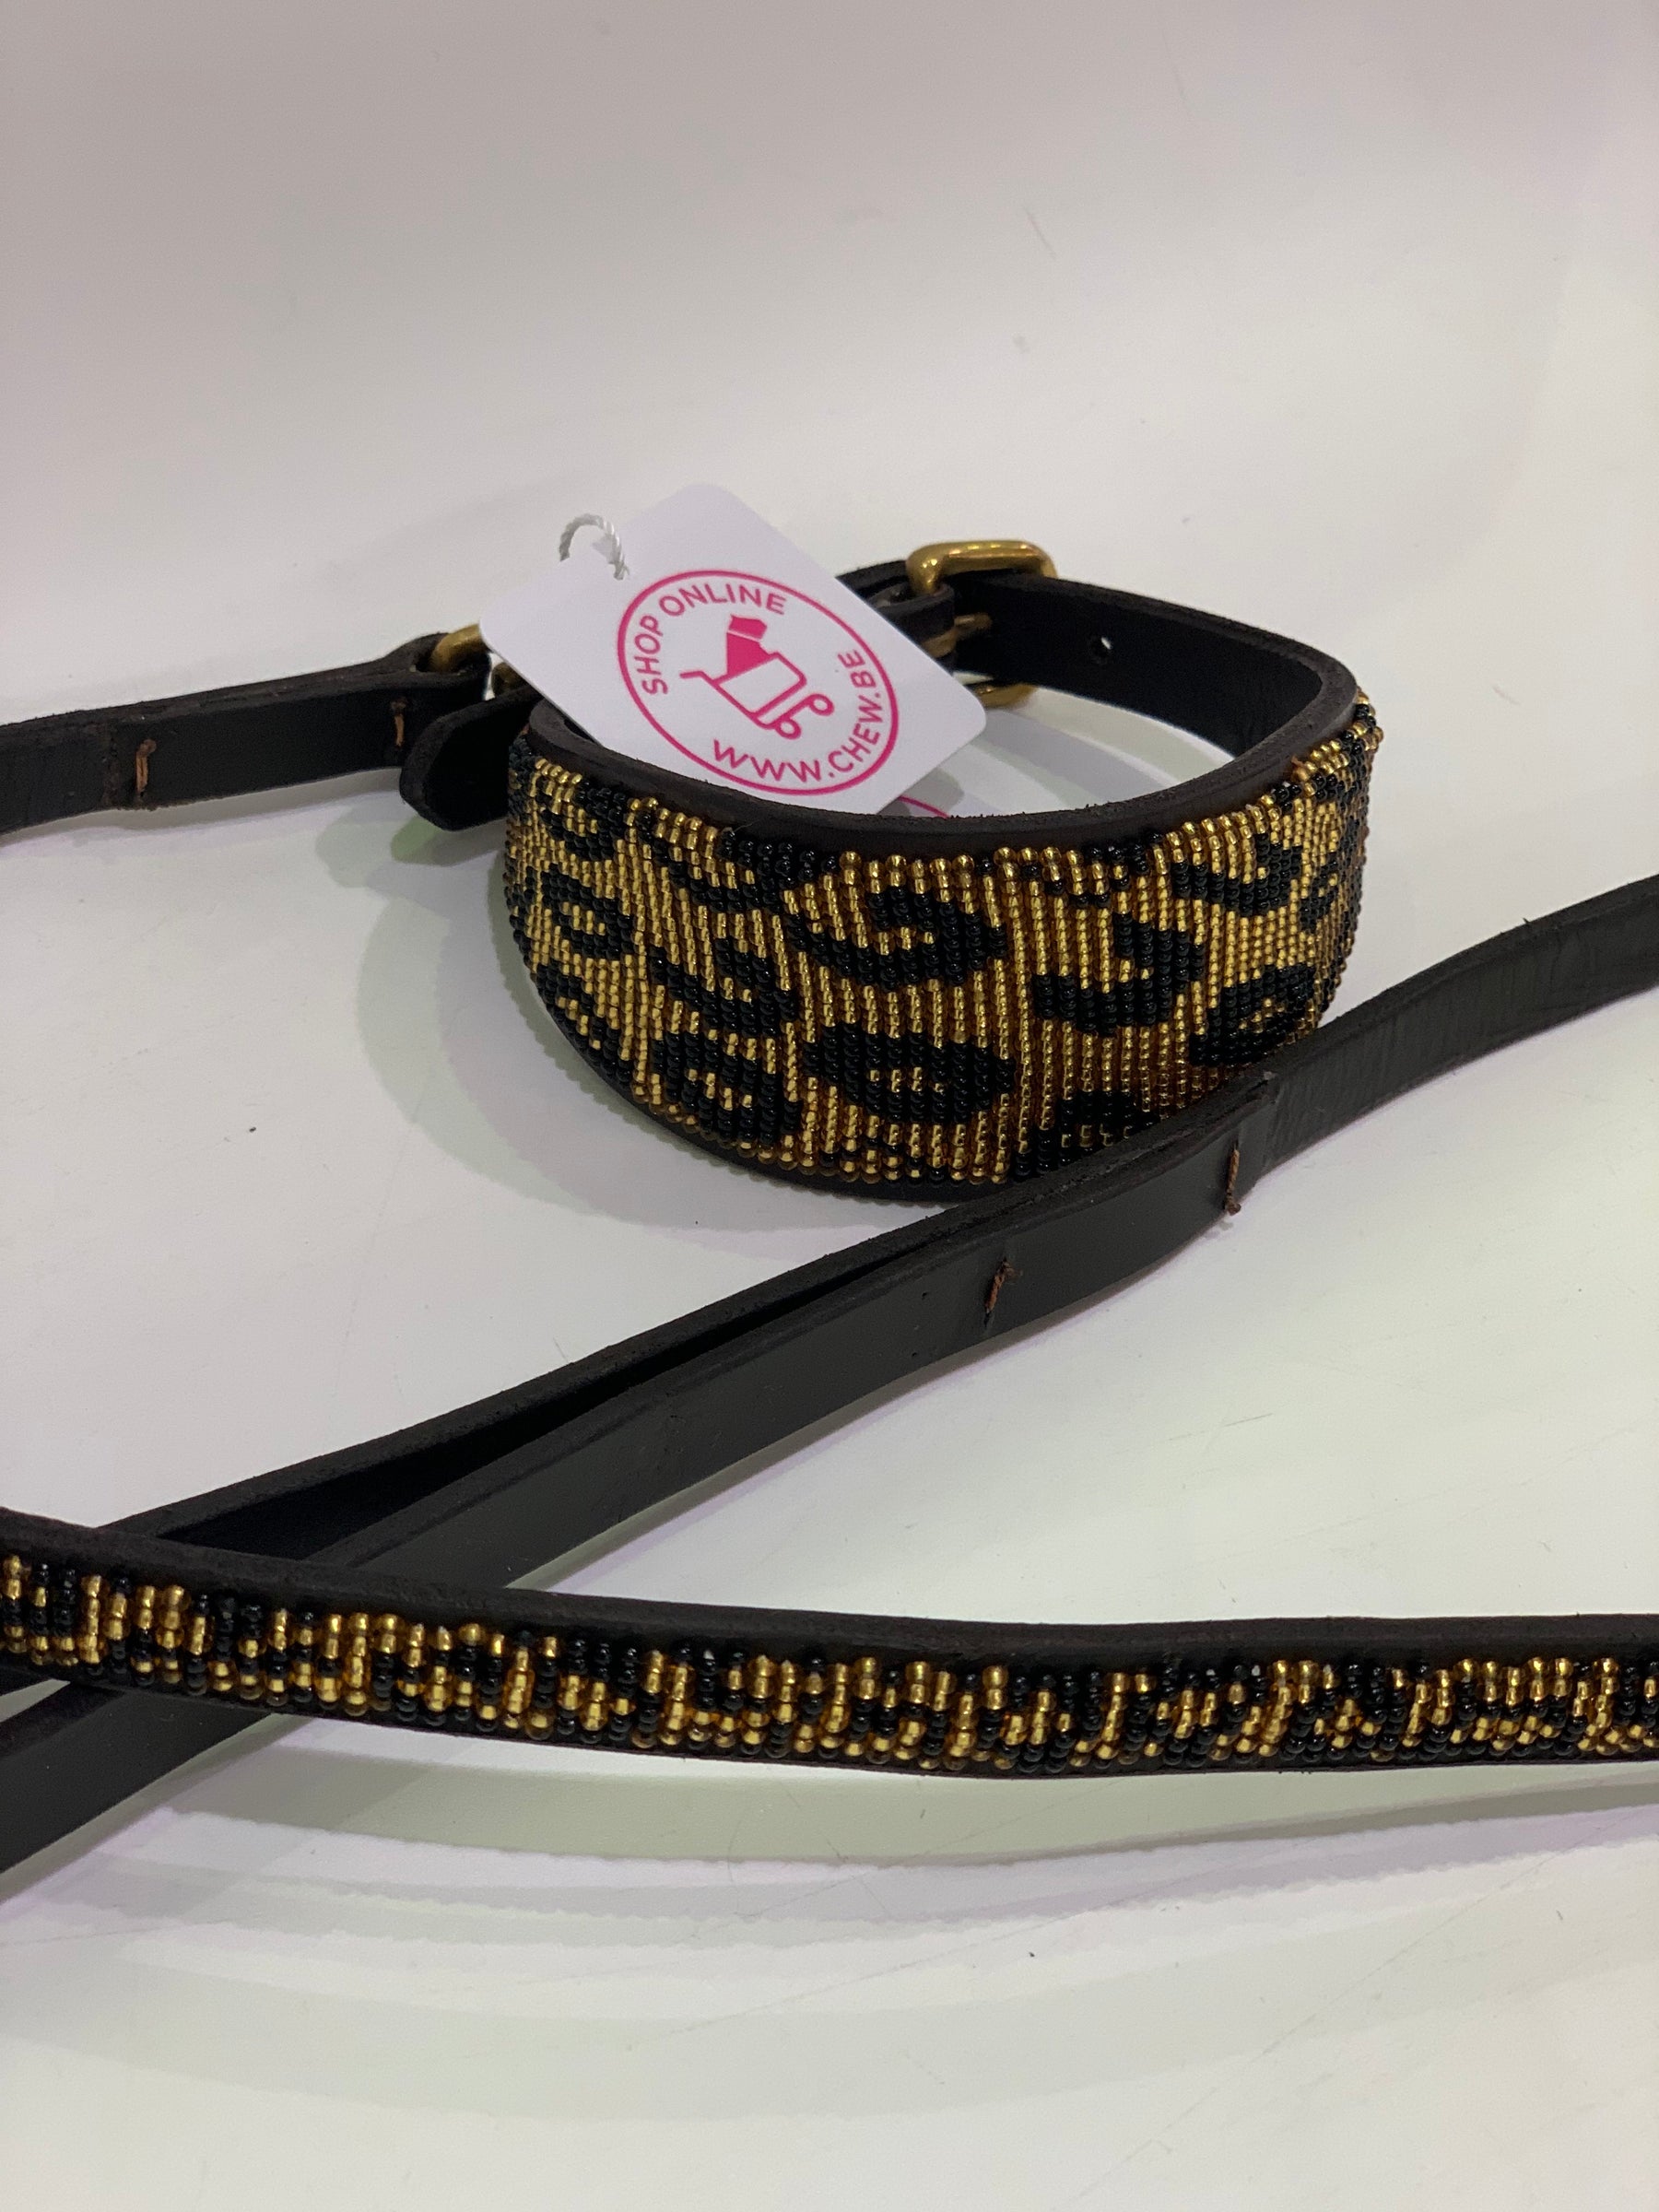 Leopard leiband